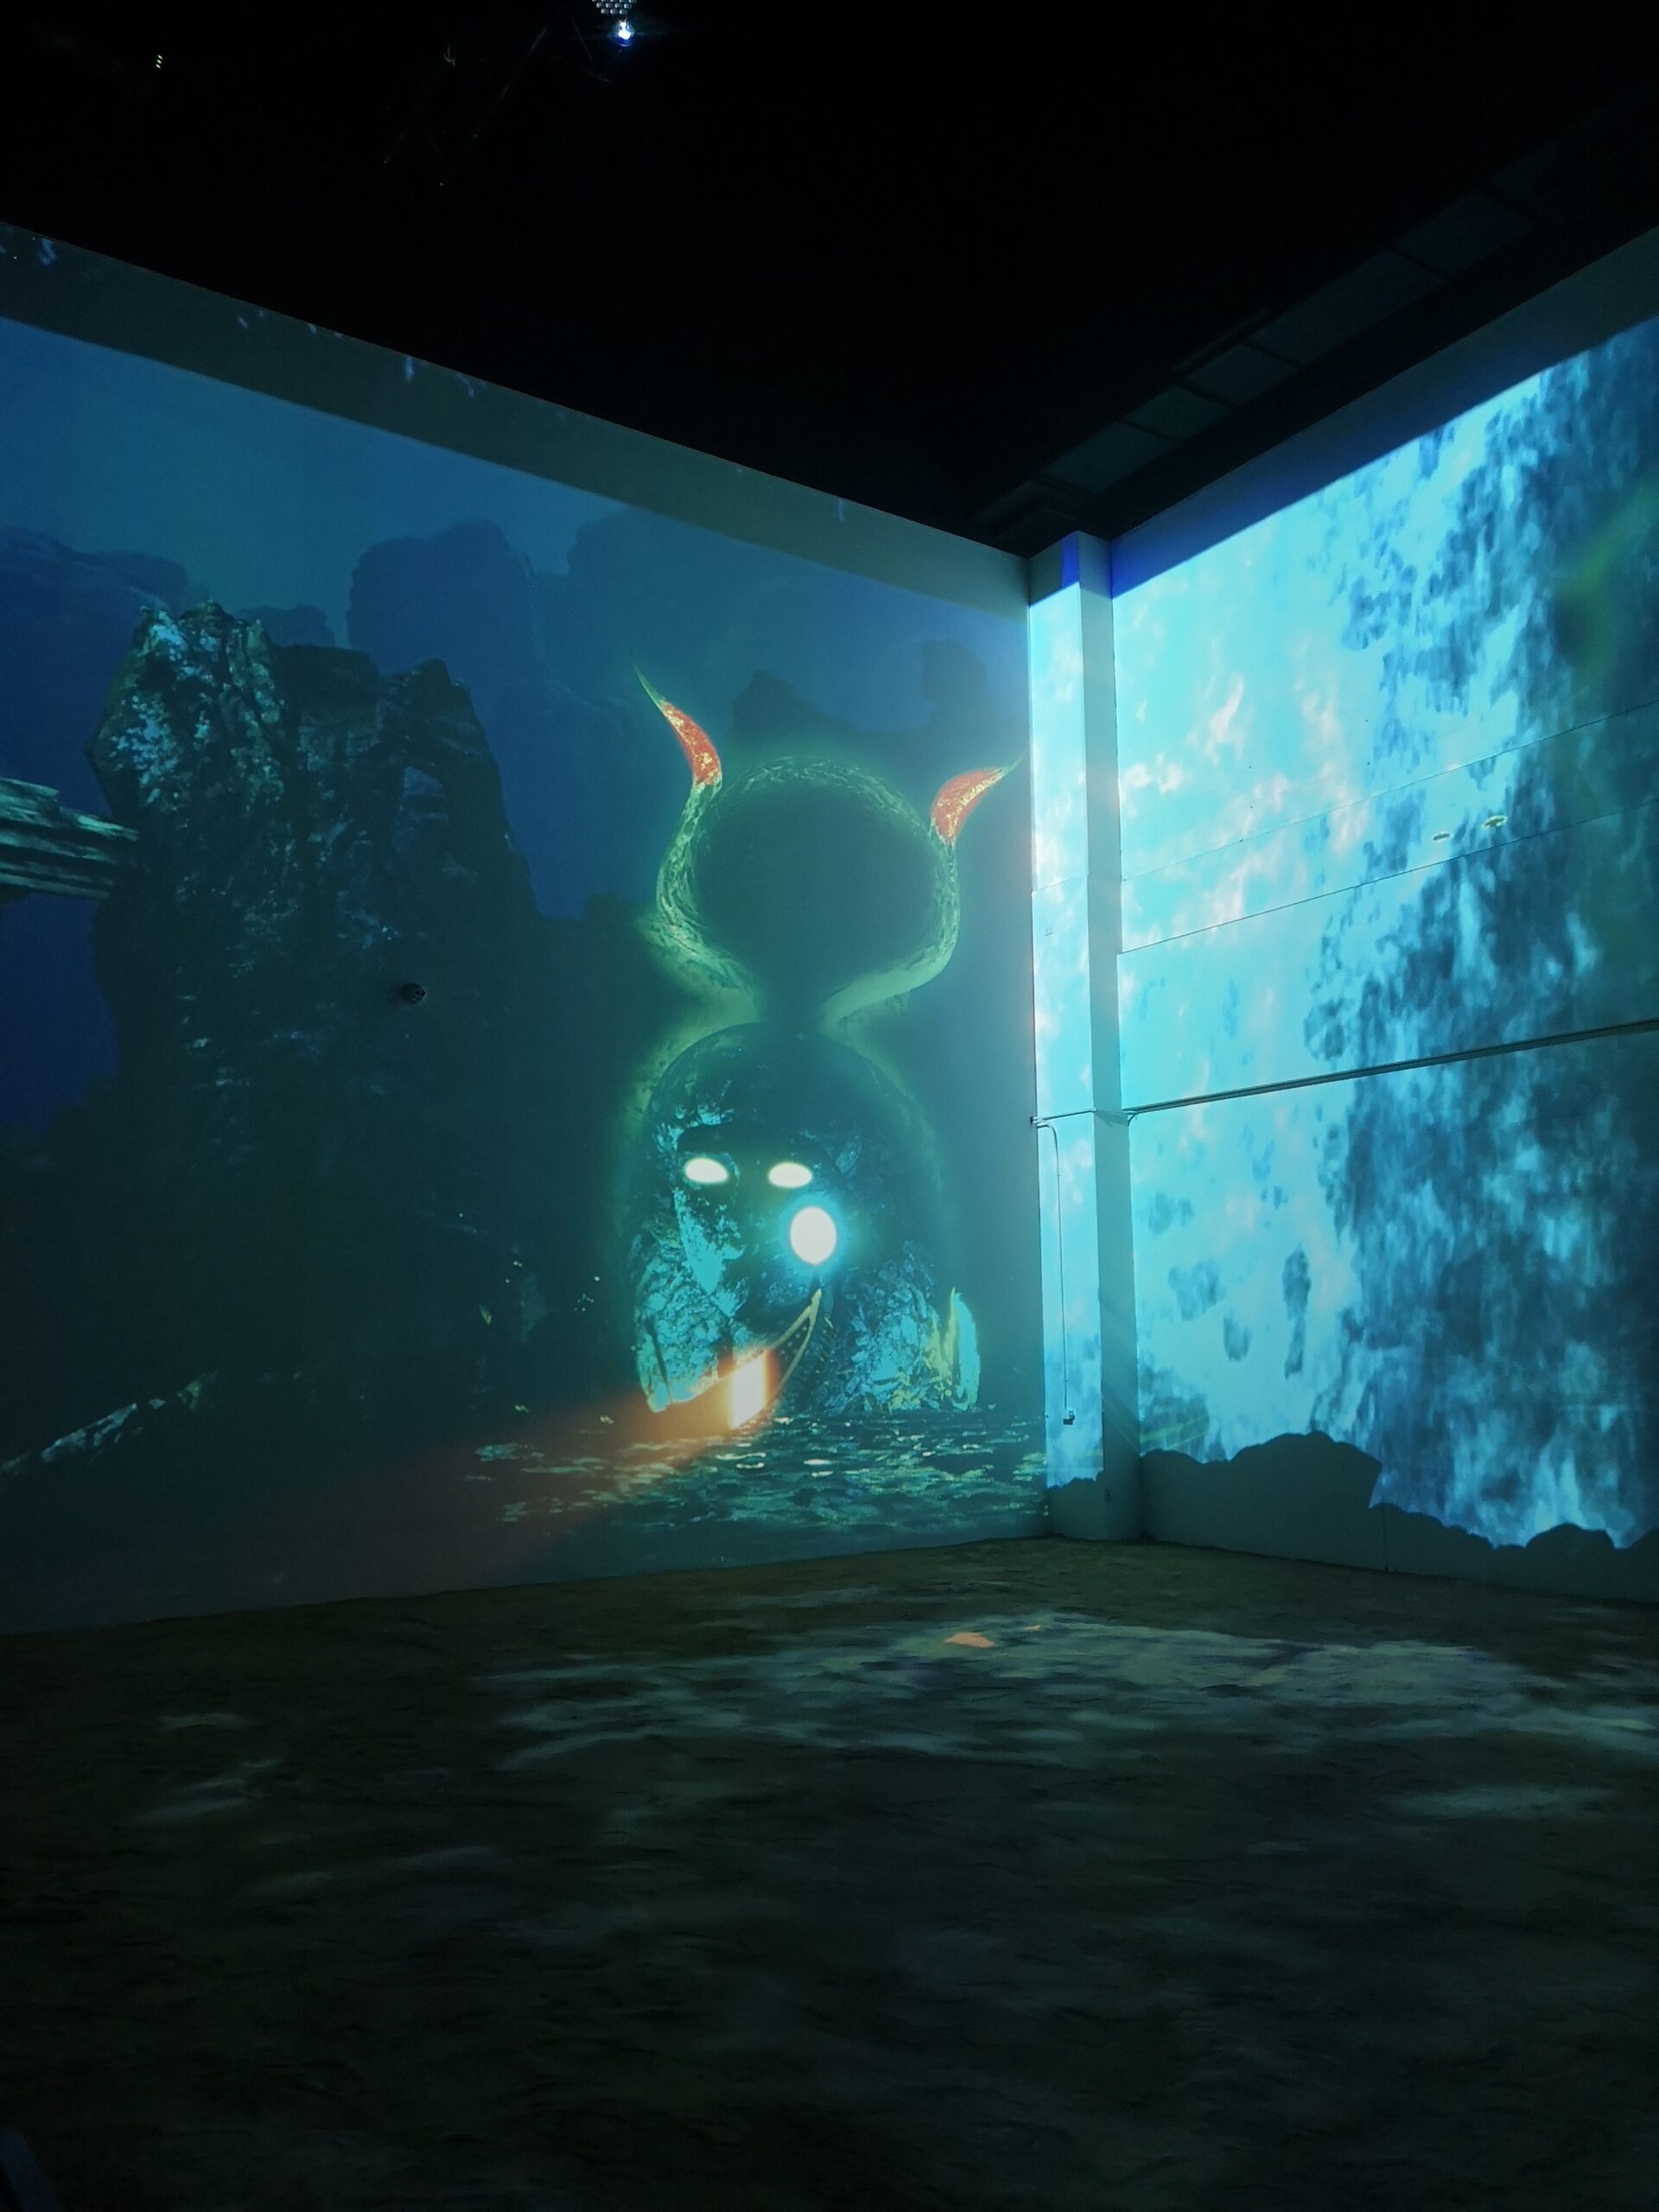 Image of Immersive Tut. A statue of the goddesses Hathor appears underwater.